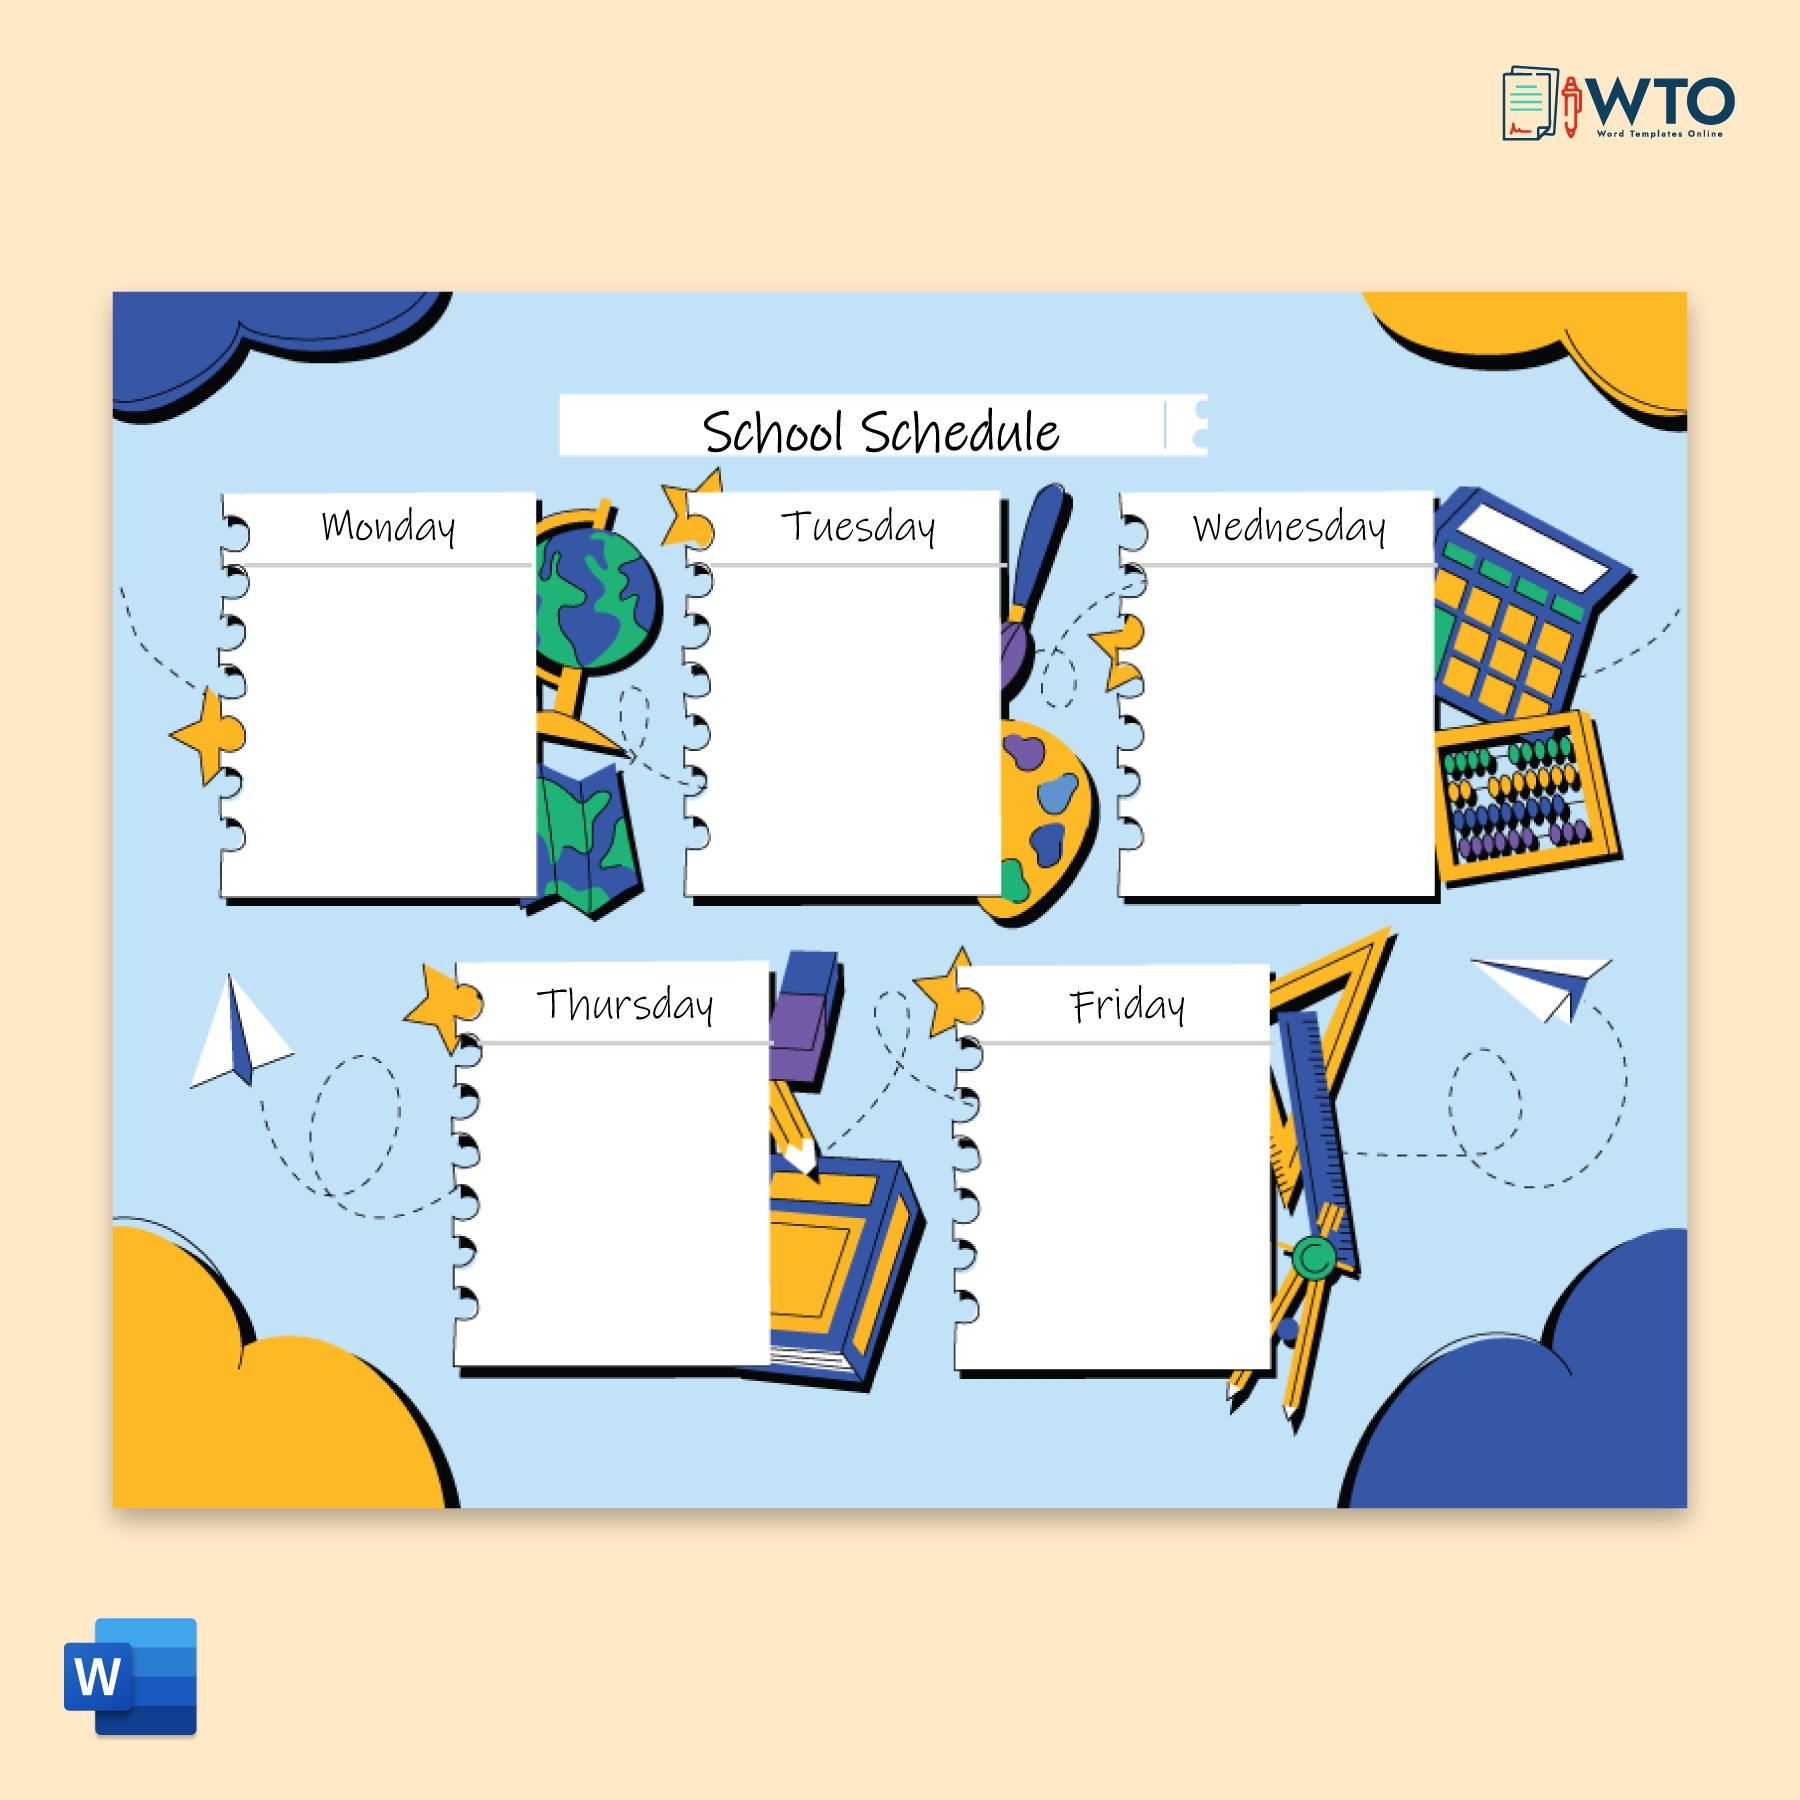 School Timetable Template in Word